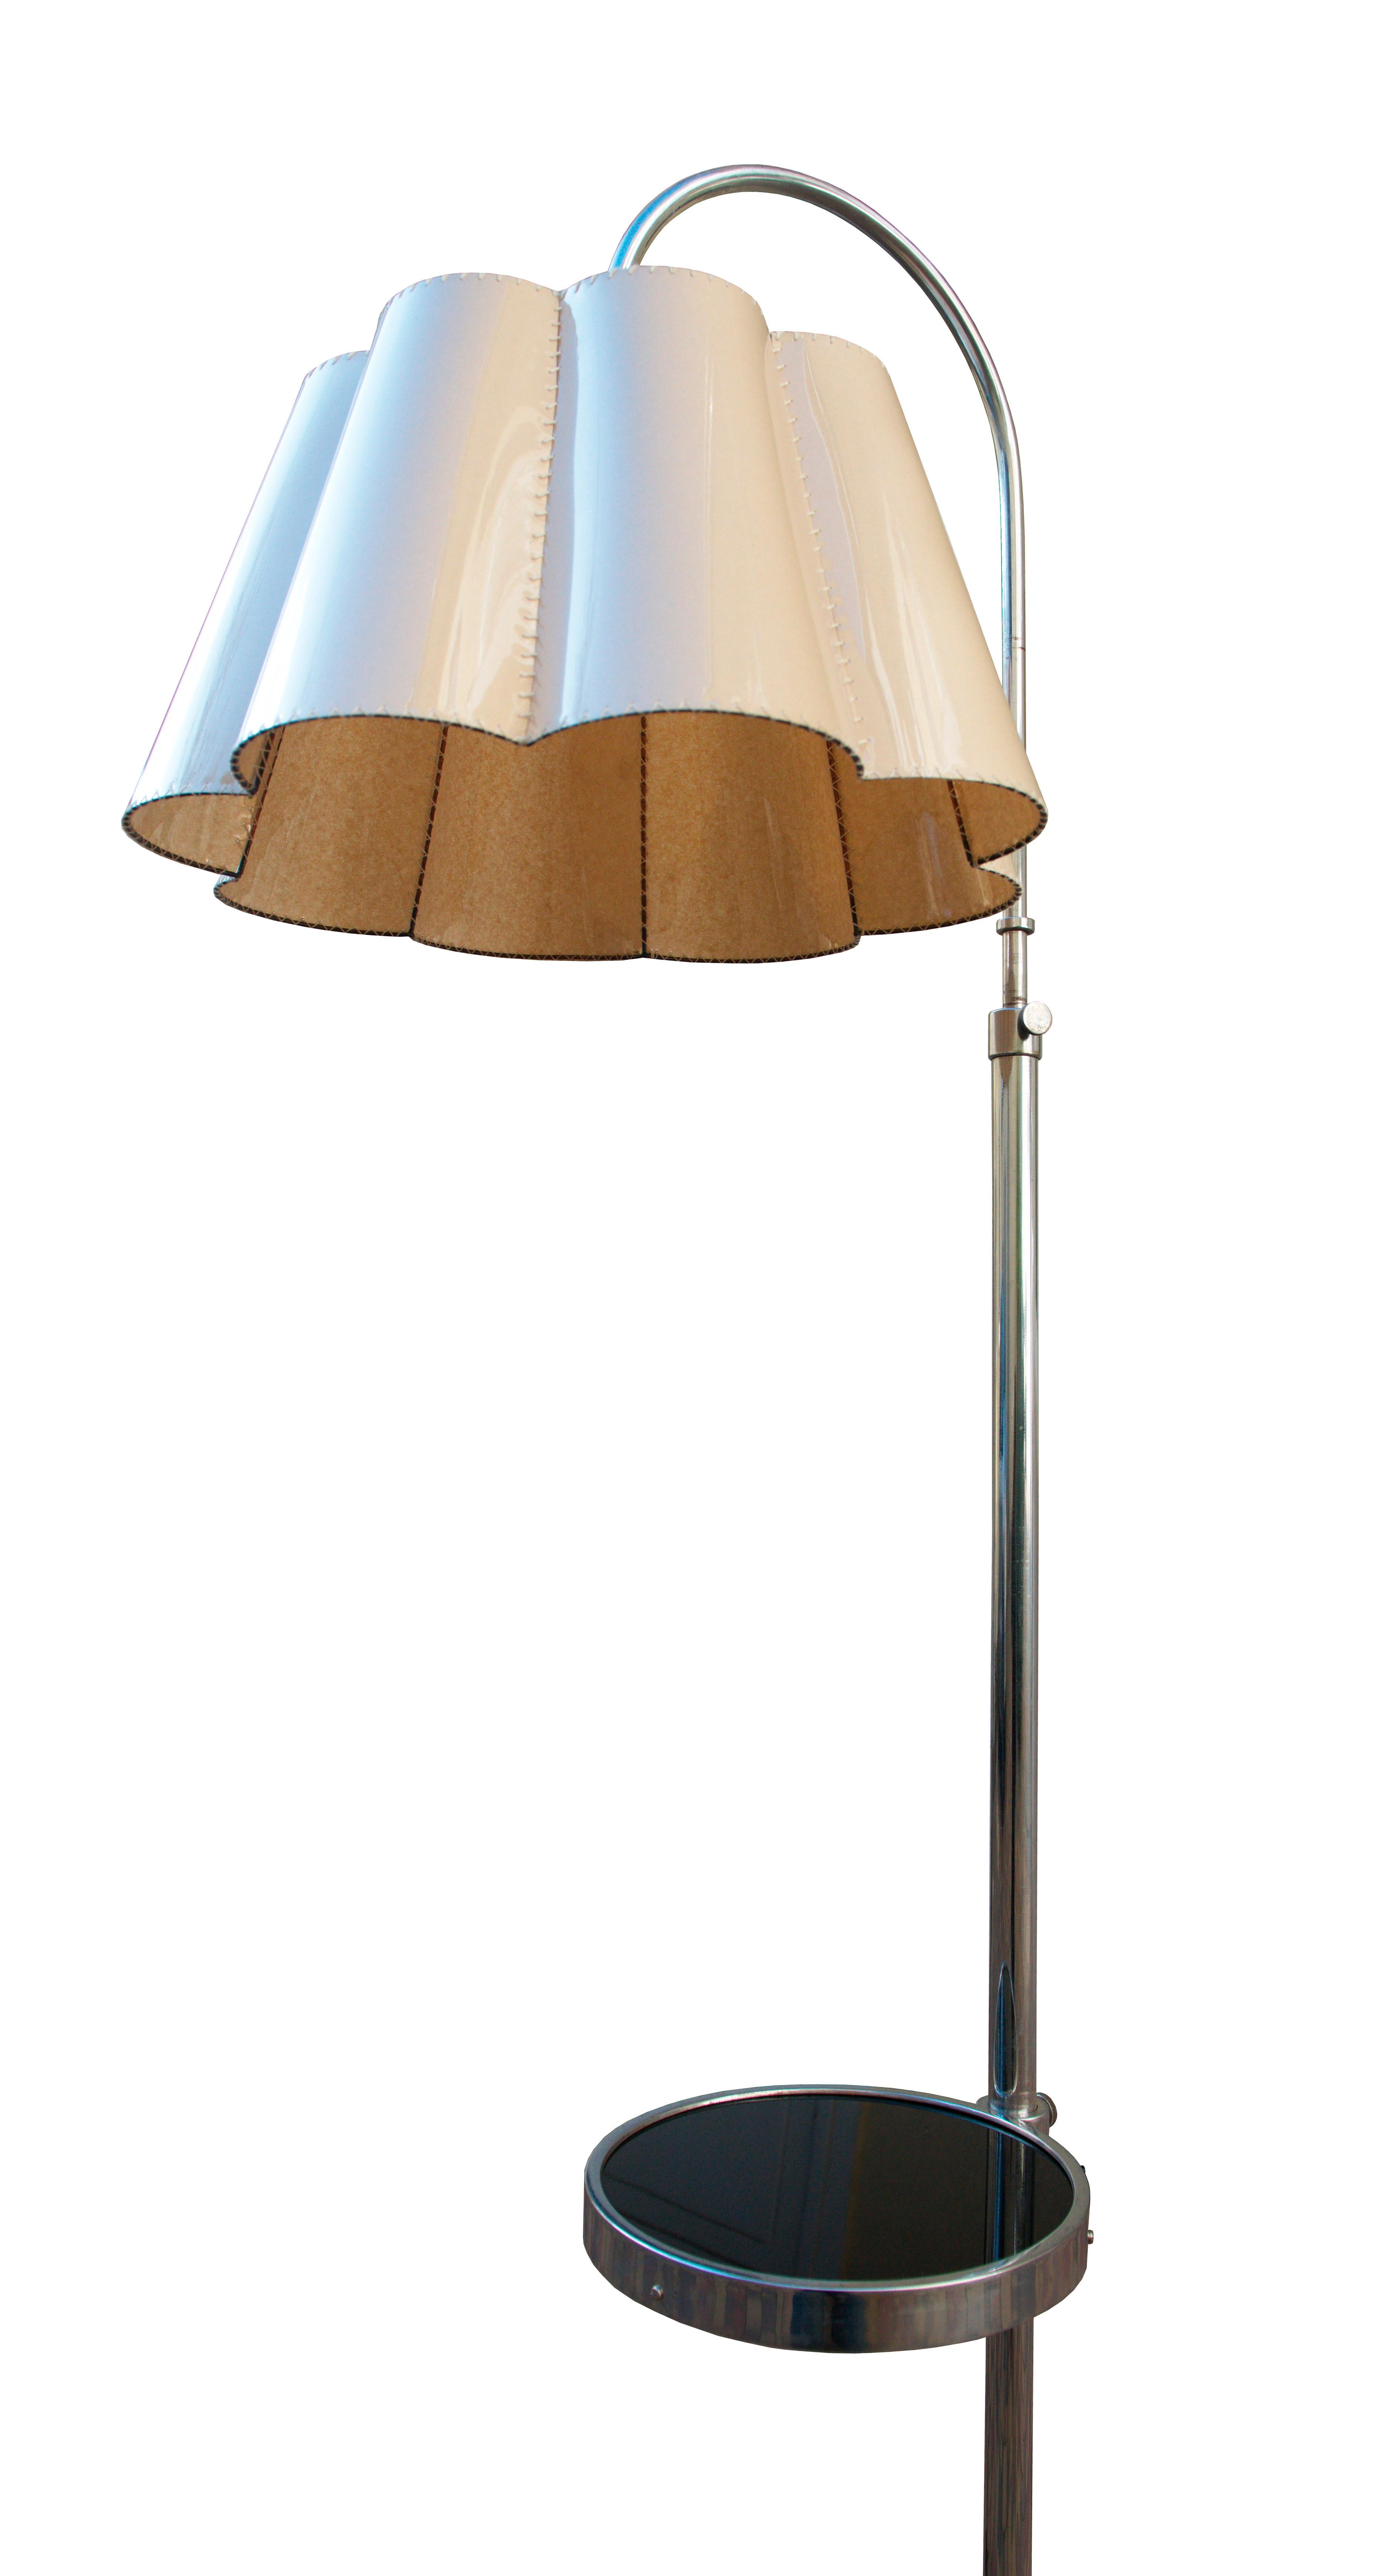 1930's Modernist Floor Lamp In Good Condition For Sale In Brno, CZ